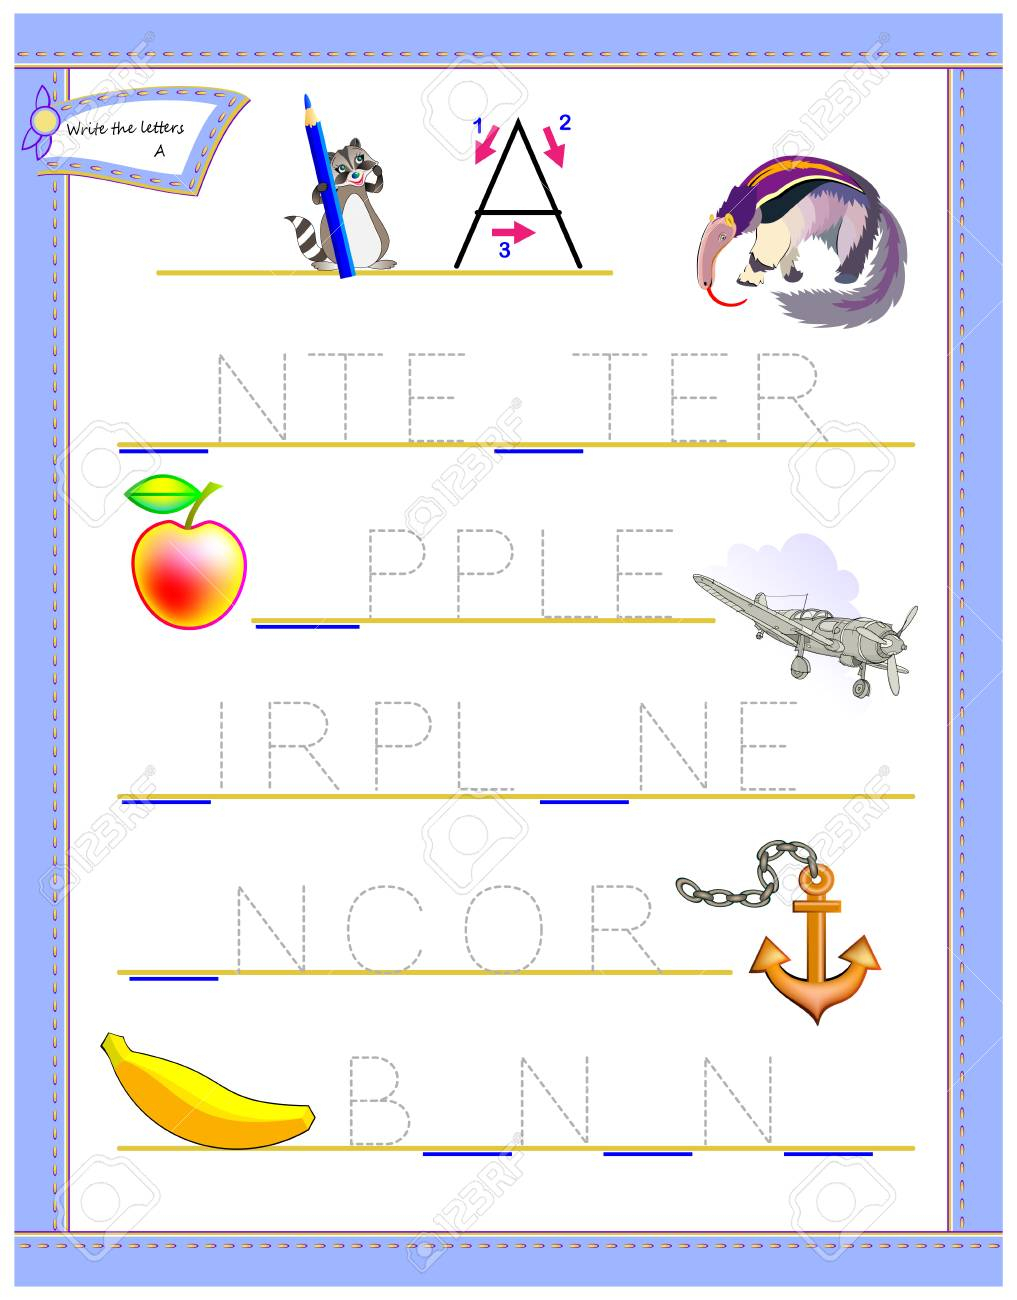 Tracing Letter A For Study English Alphabet. Worksheet For Kids for Alphabet Worksheets English